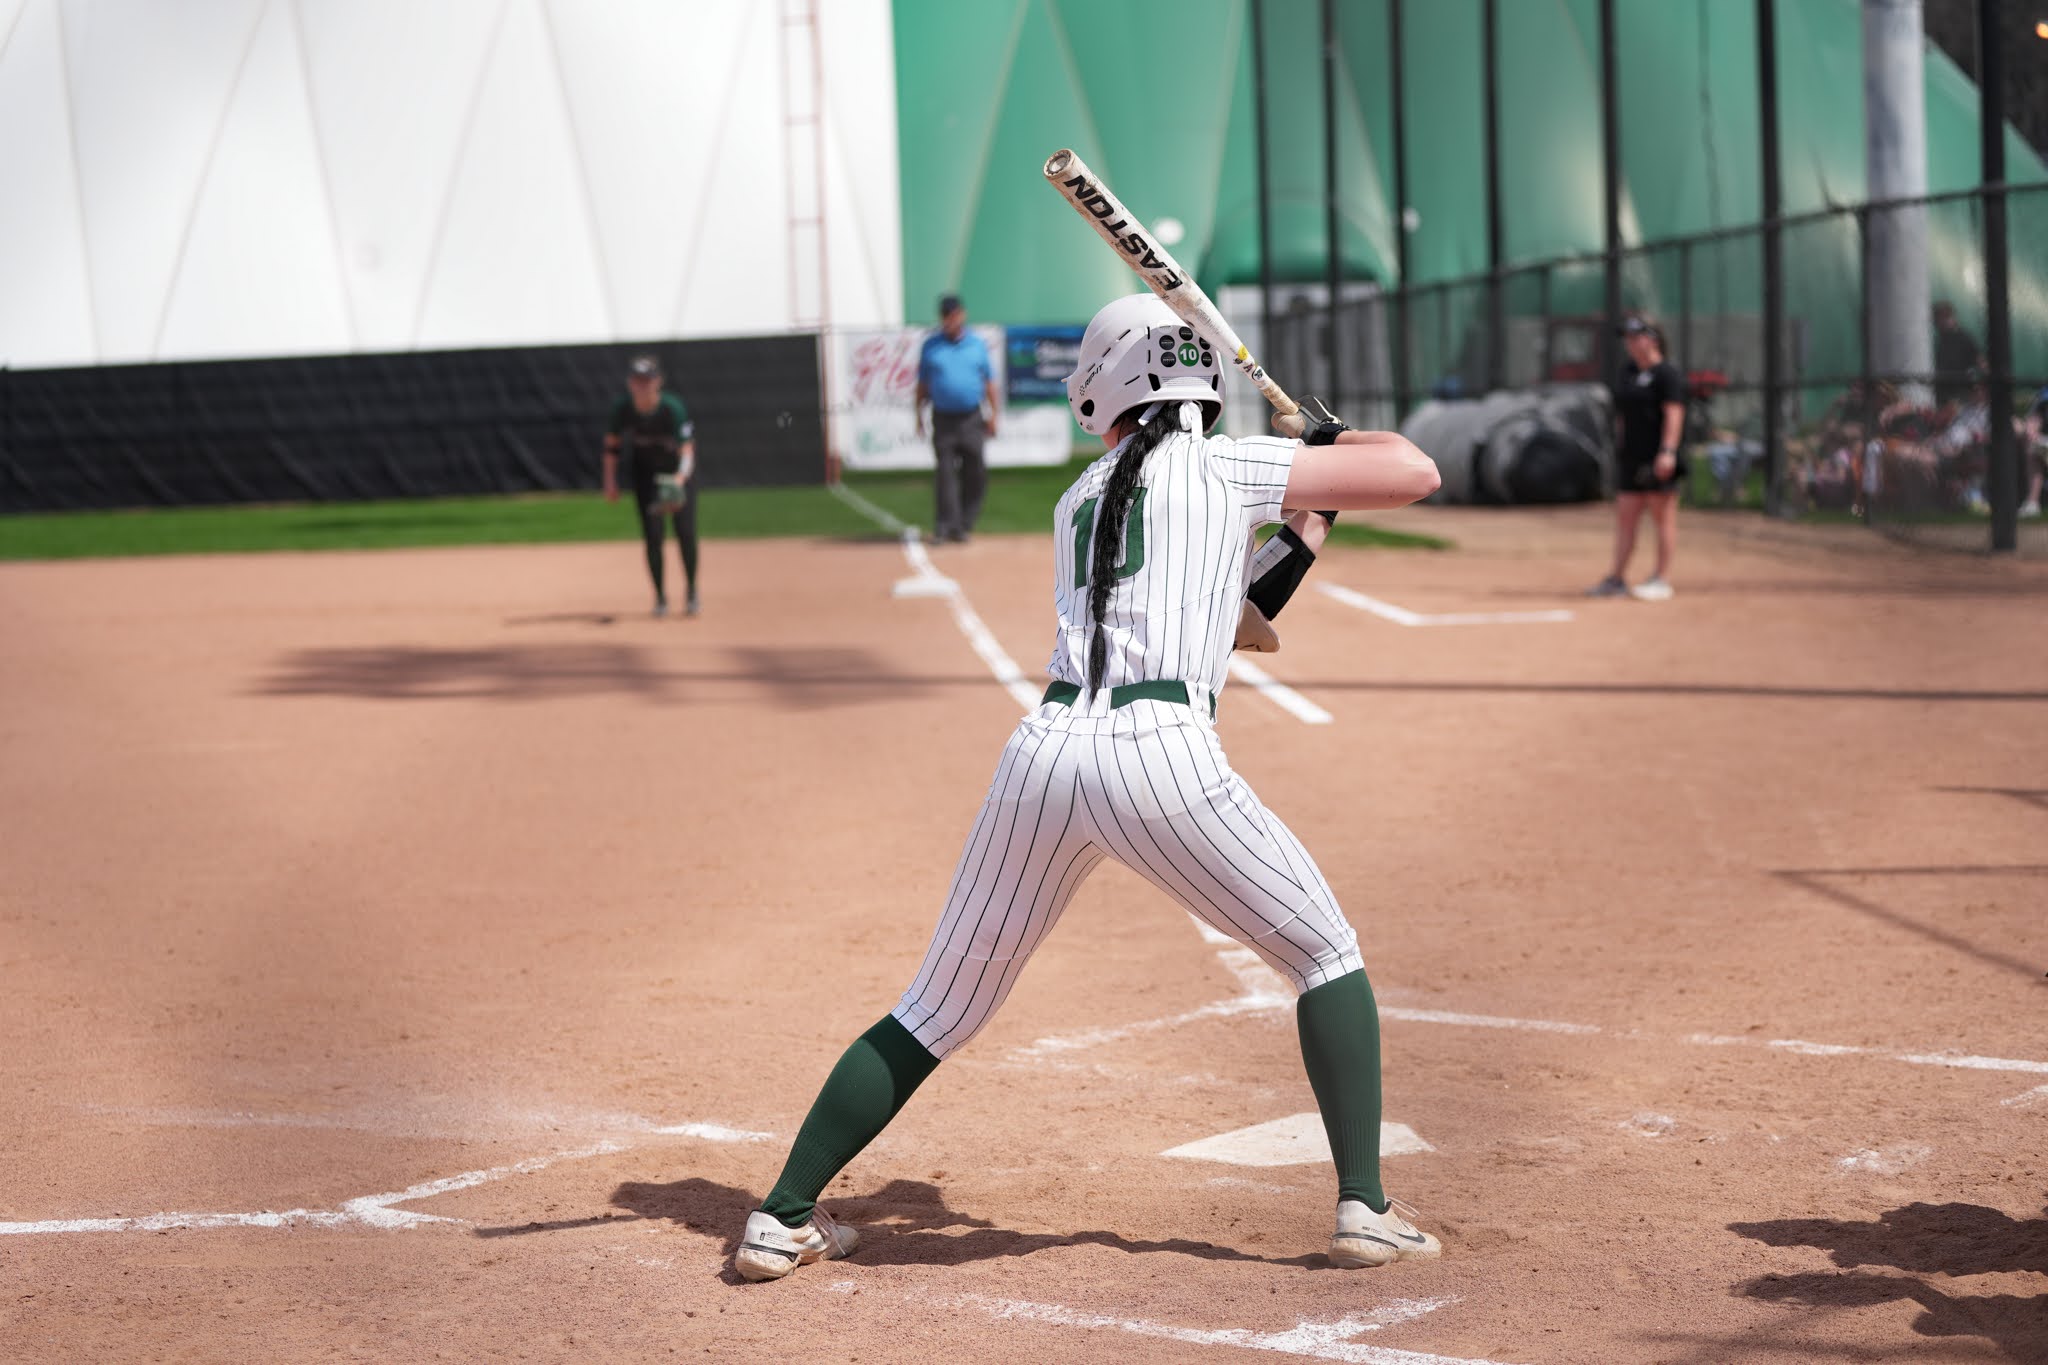 Cleveland State Softball Wins Fourth Straight #HLSB Series with Win over Green Bay